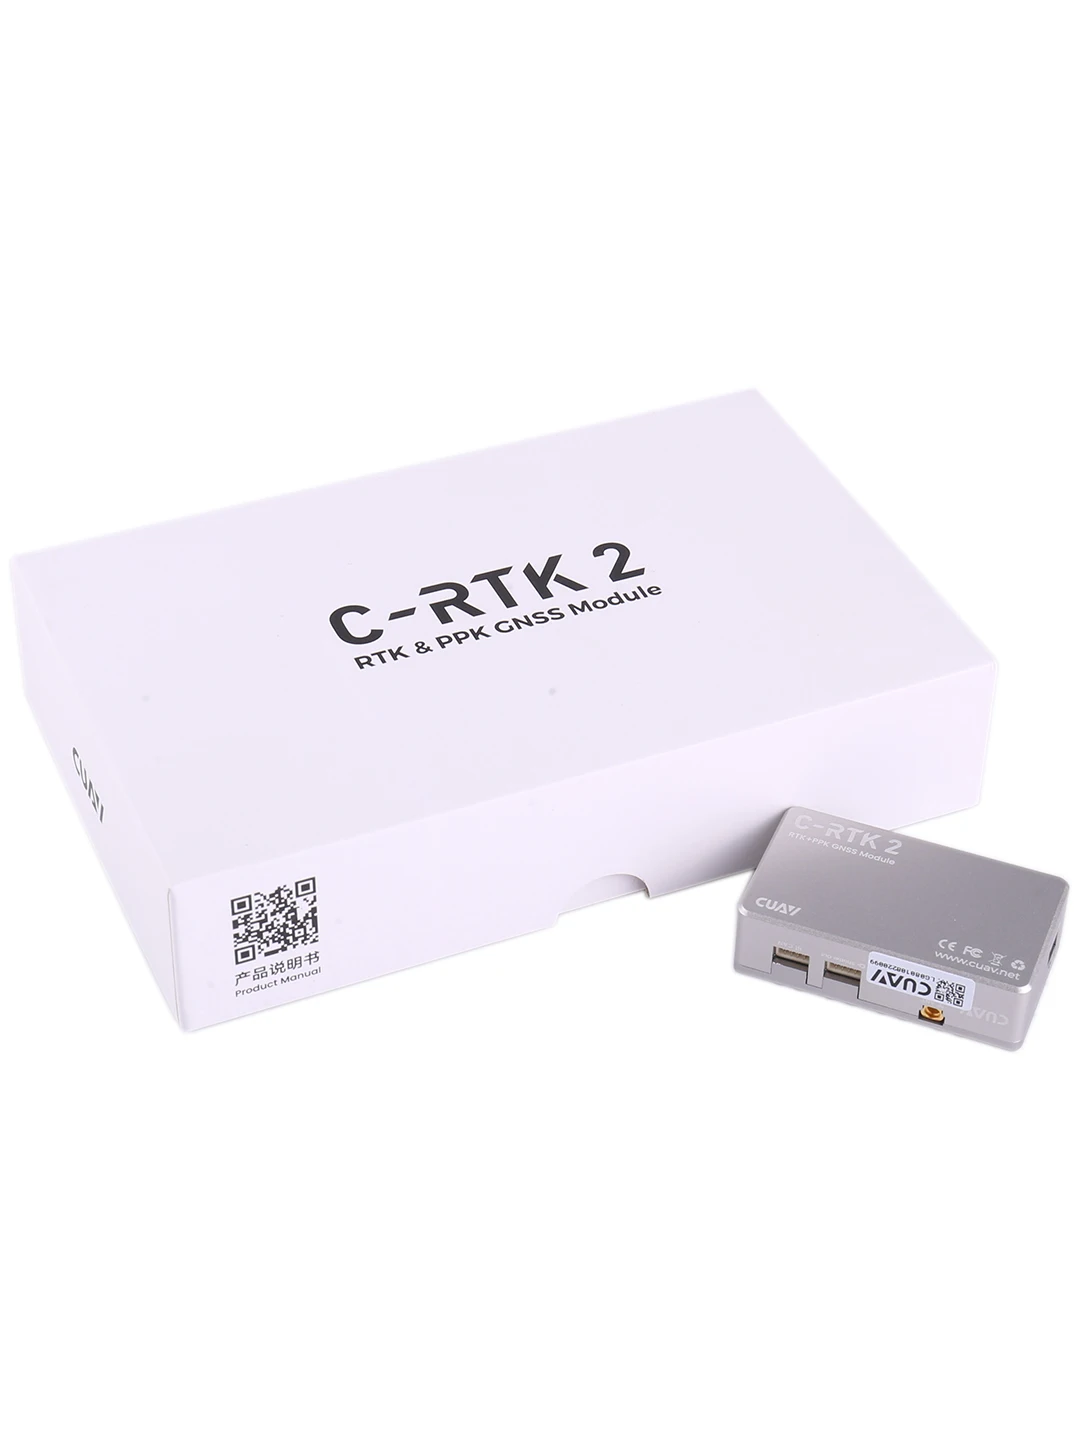 

CUAV NEW C-RTK 2 High Precision Multi-Star Multi-Frequency Mapping Support PPK And RTK GNSS Module